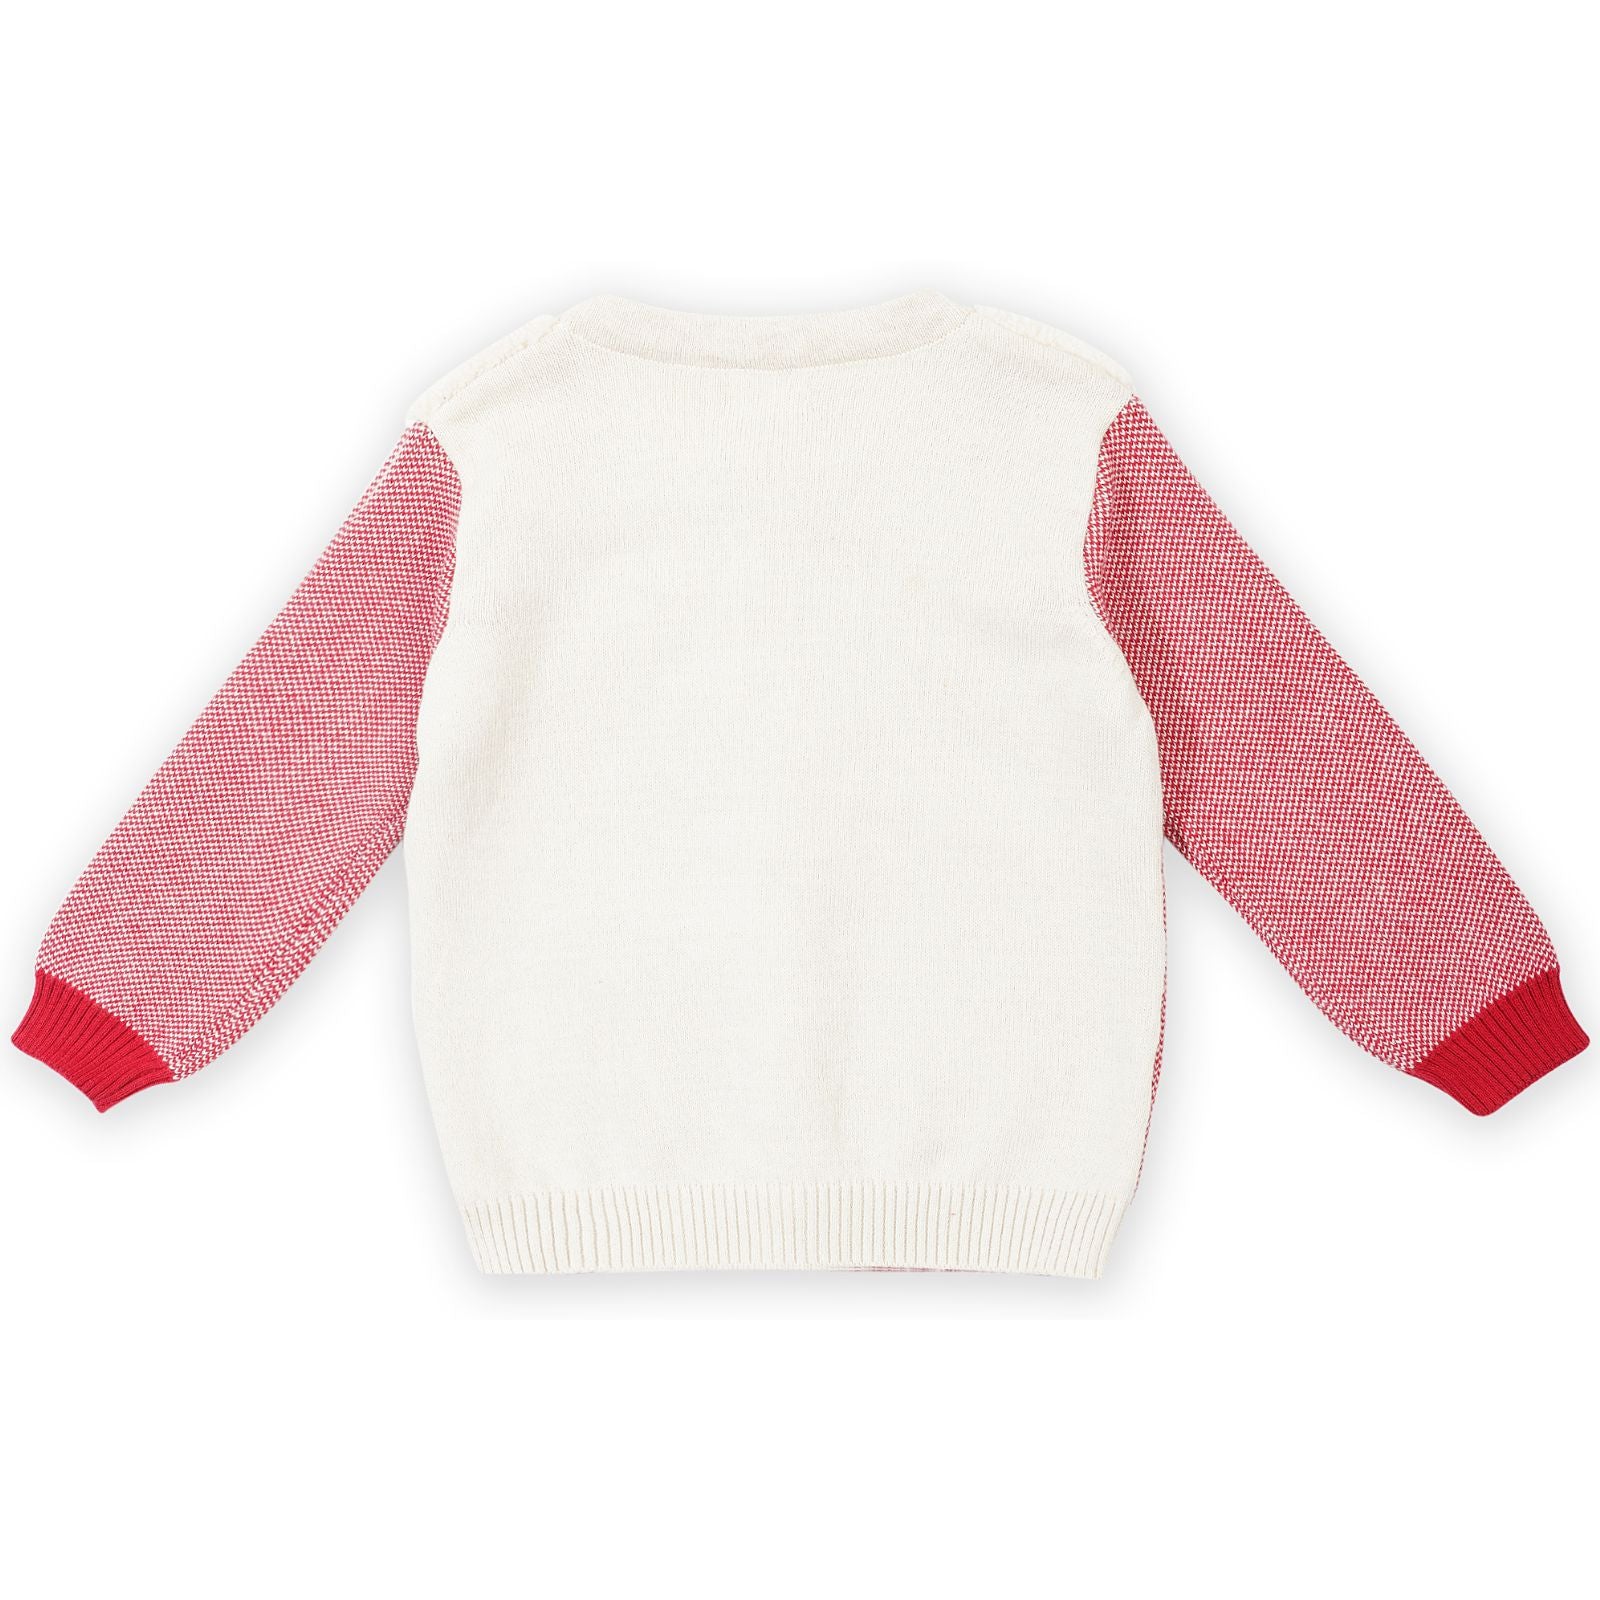 Wiskers  Jacquard Sweater - Red